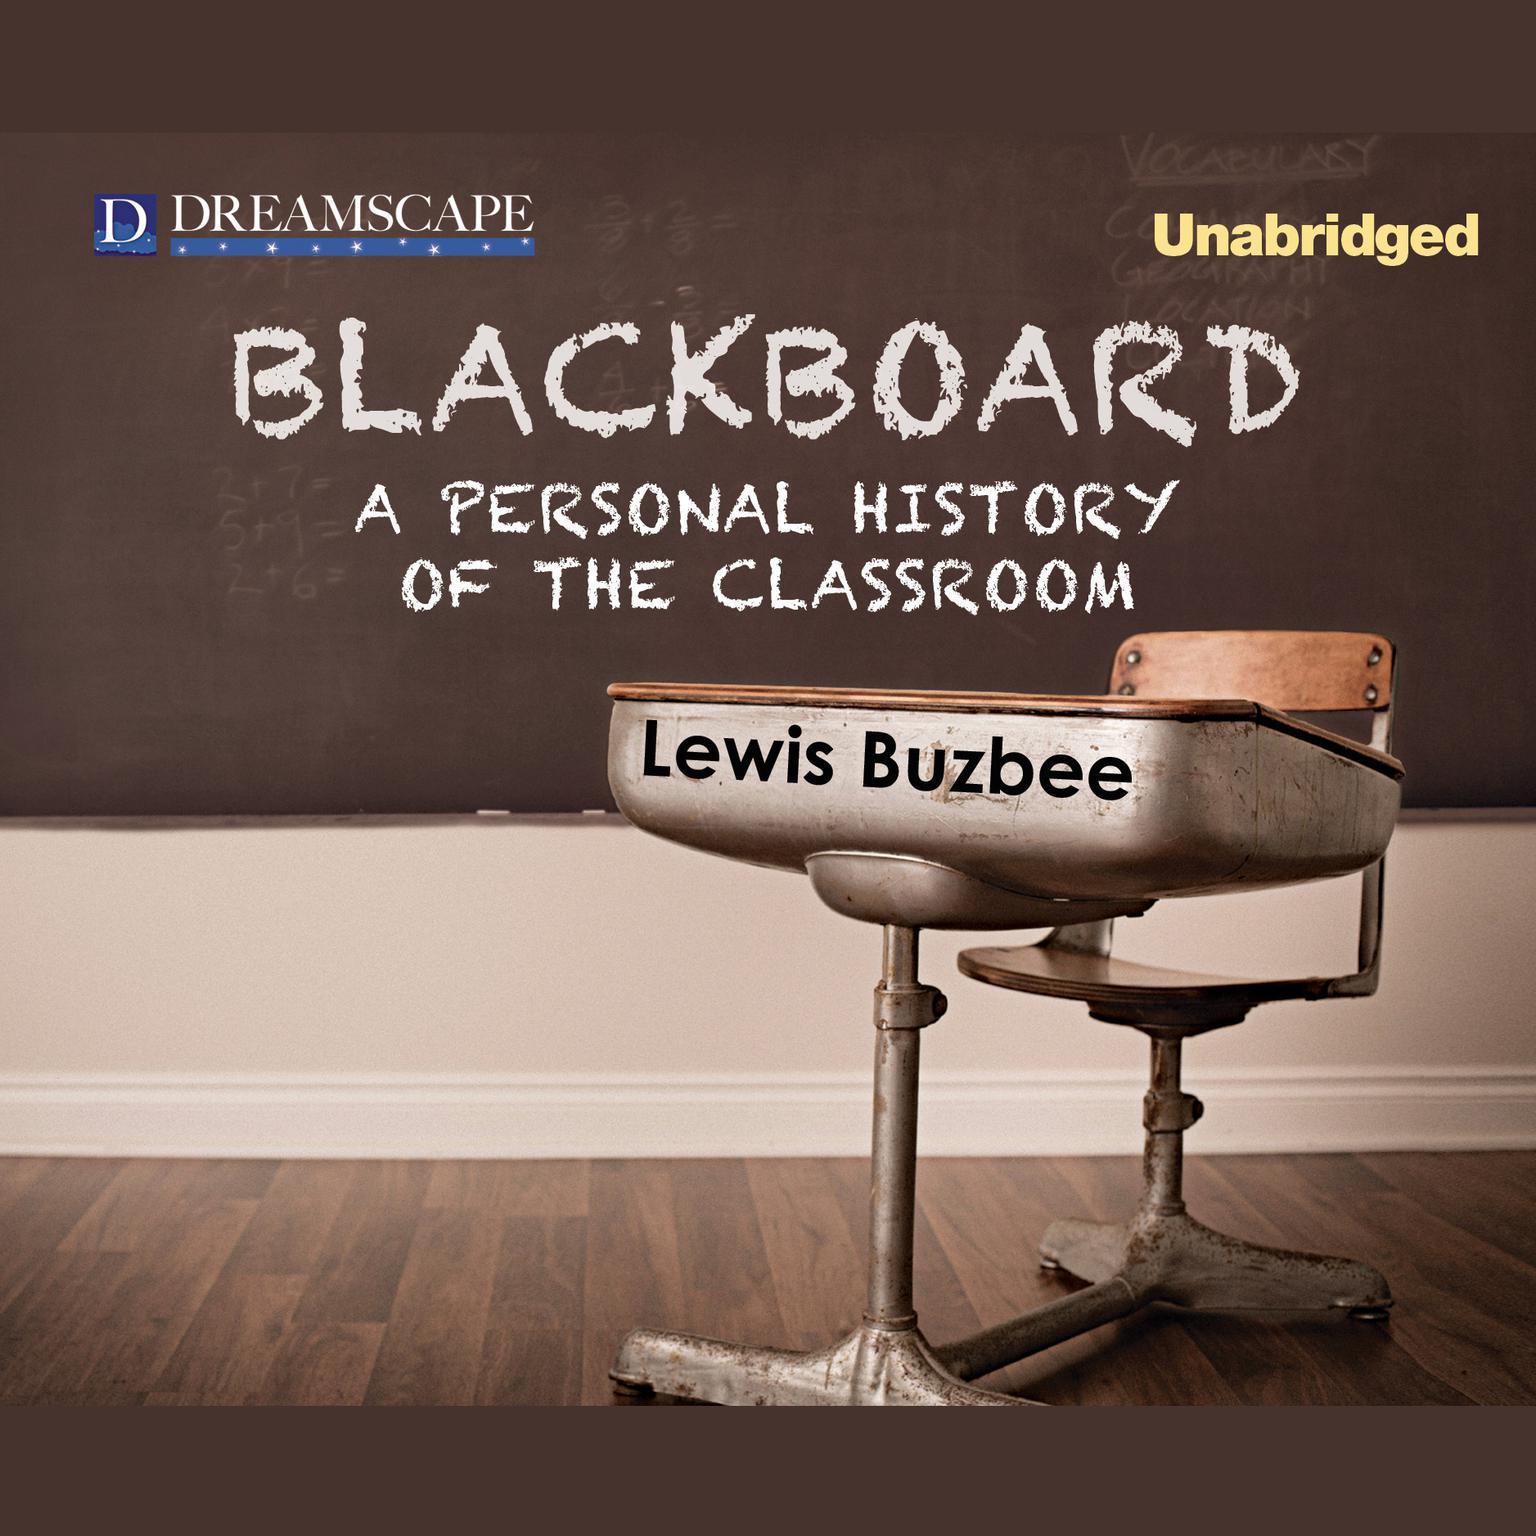 Blackboard: A Personal History of the Classroom Audiobook, by Lewis Buzbee